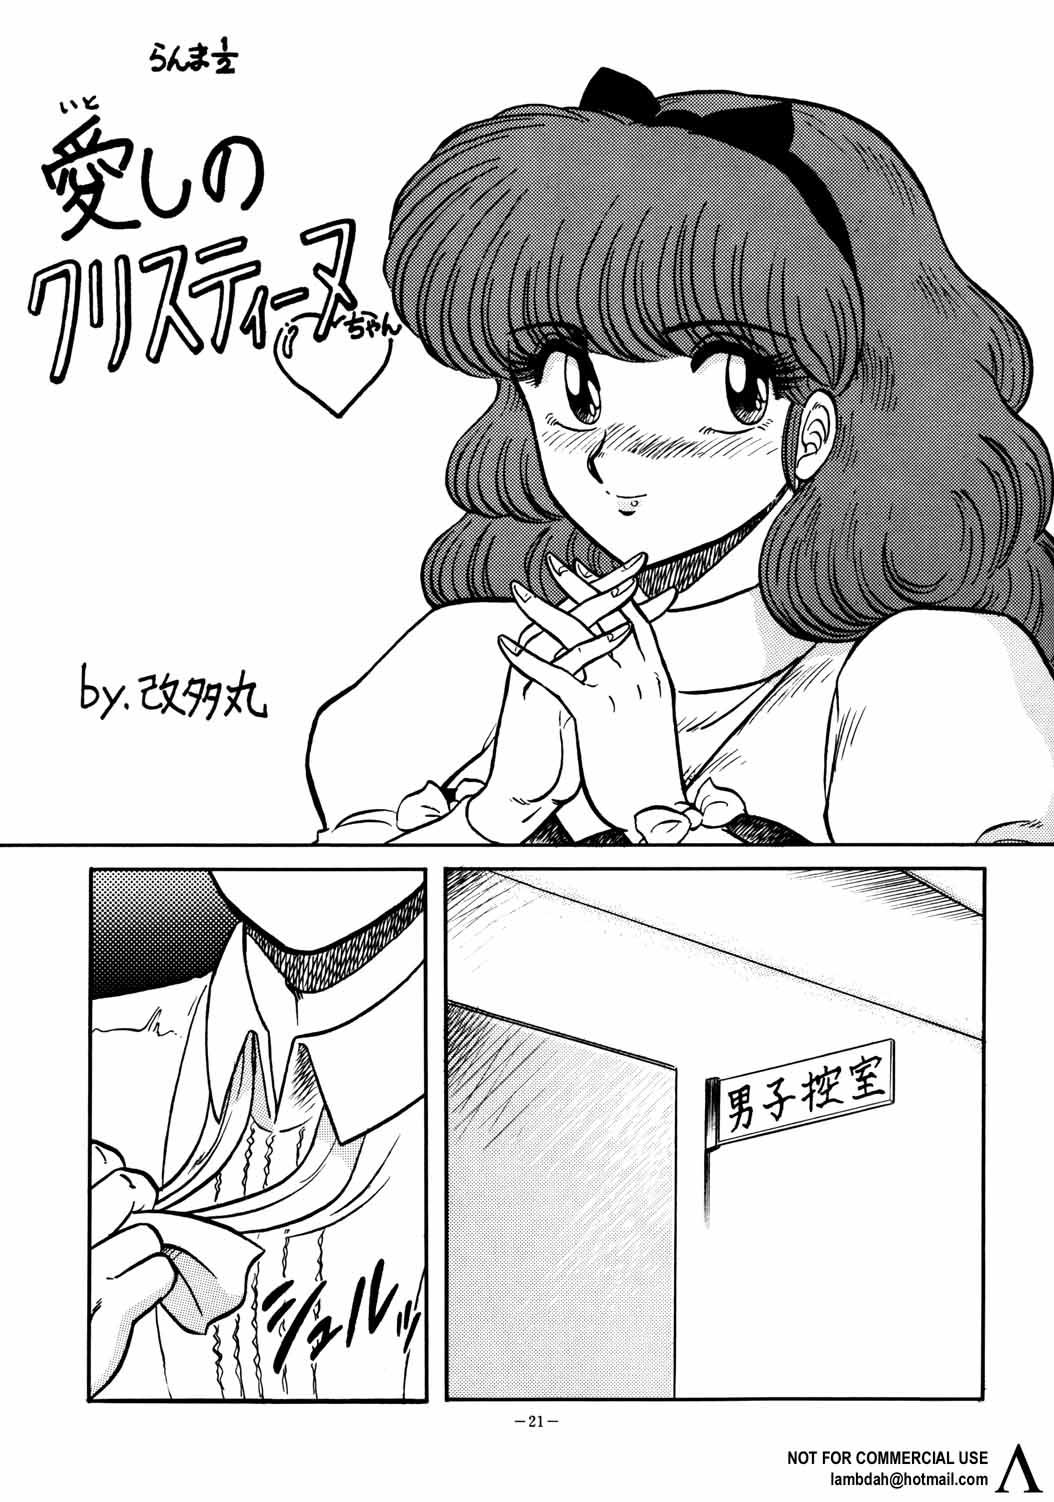 Penis Look Out 26 - Sailor moon Ranma 12 Video girl ai Cdmx - Page 9